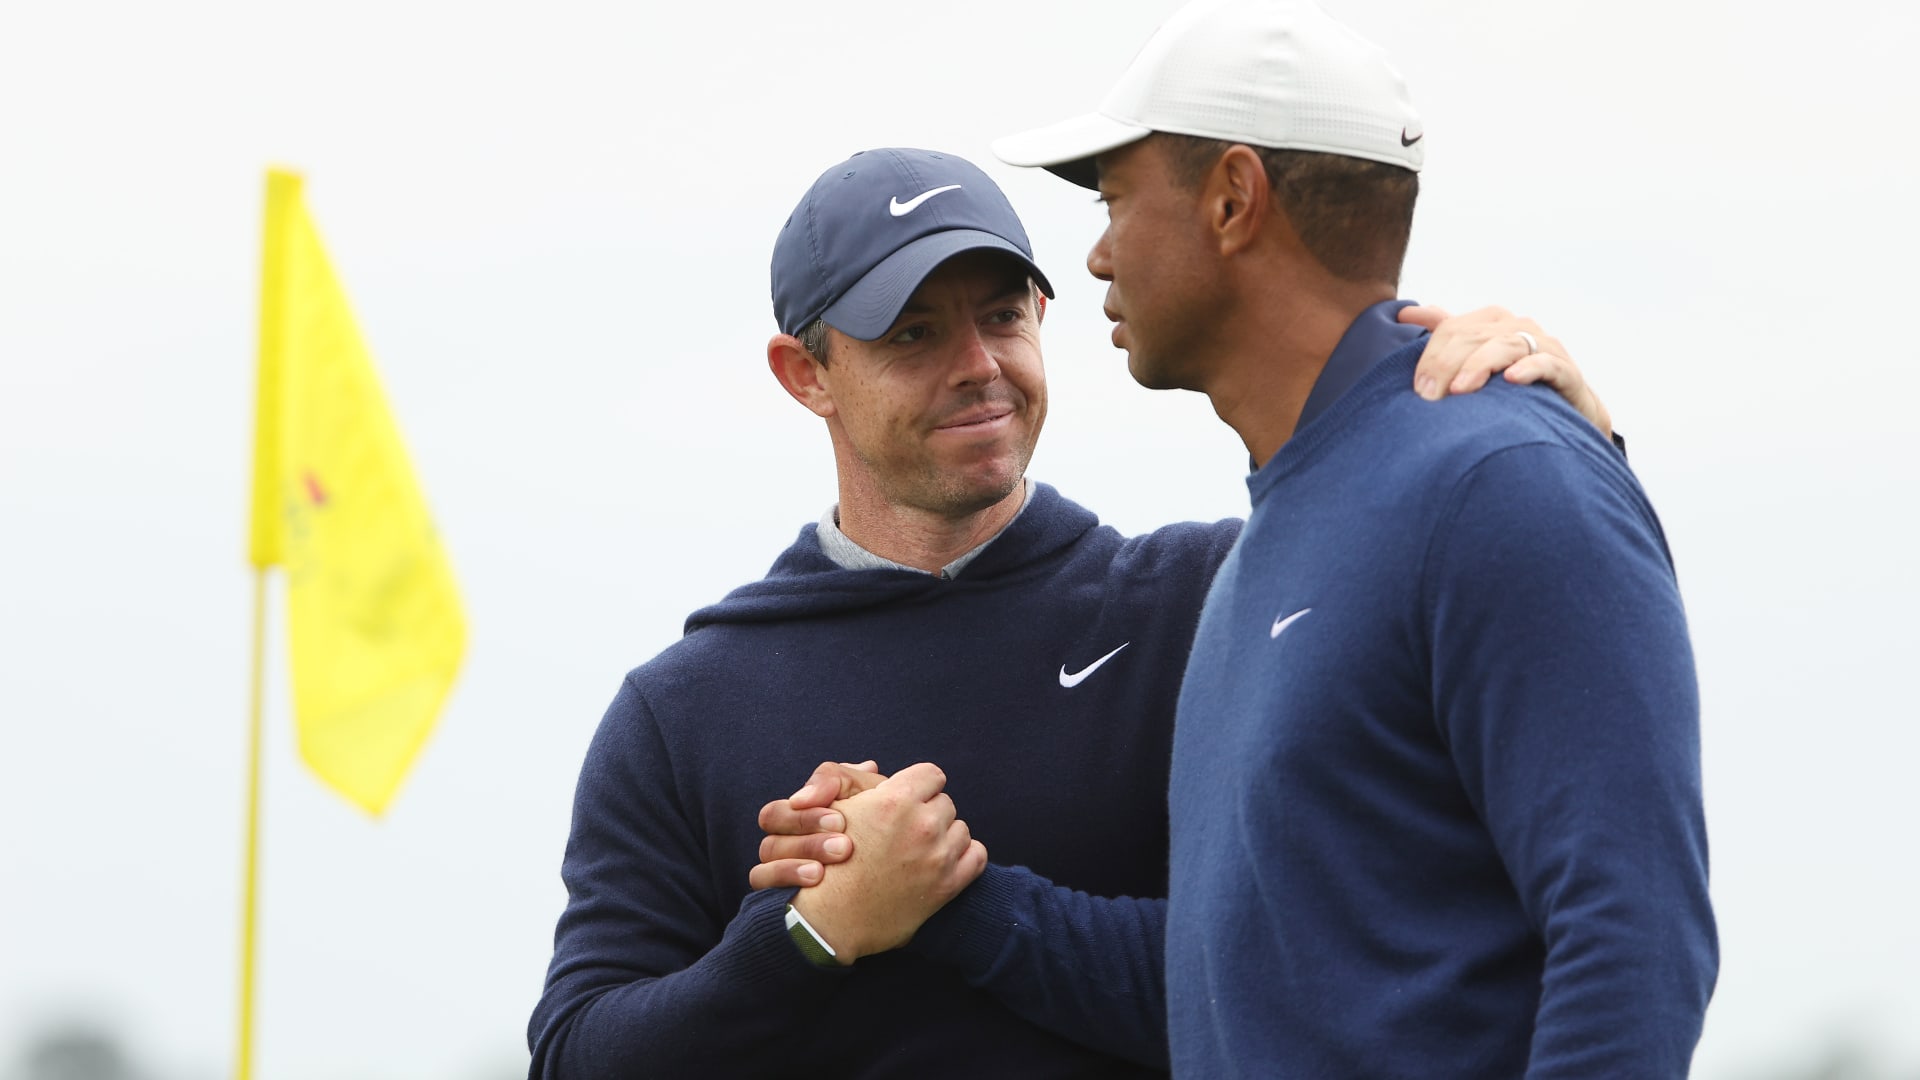 Rory McIlroy shakes hands with Tiger Woods on the 18th green after they completed a practice round prior to the 2023 Masters Tournament at Augusta National Golf Club in Augusta, Georgia, April 3, 2023.